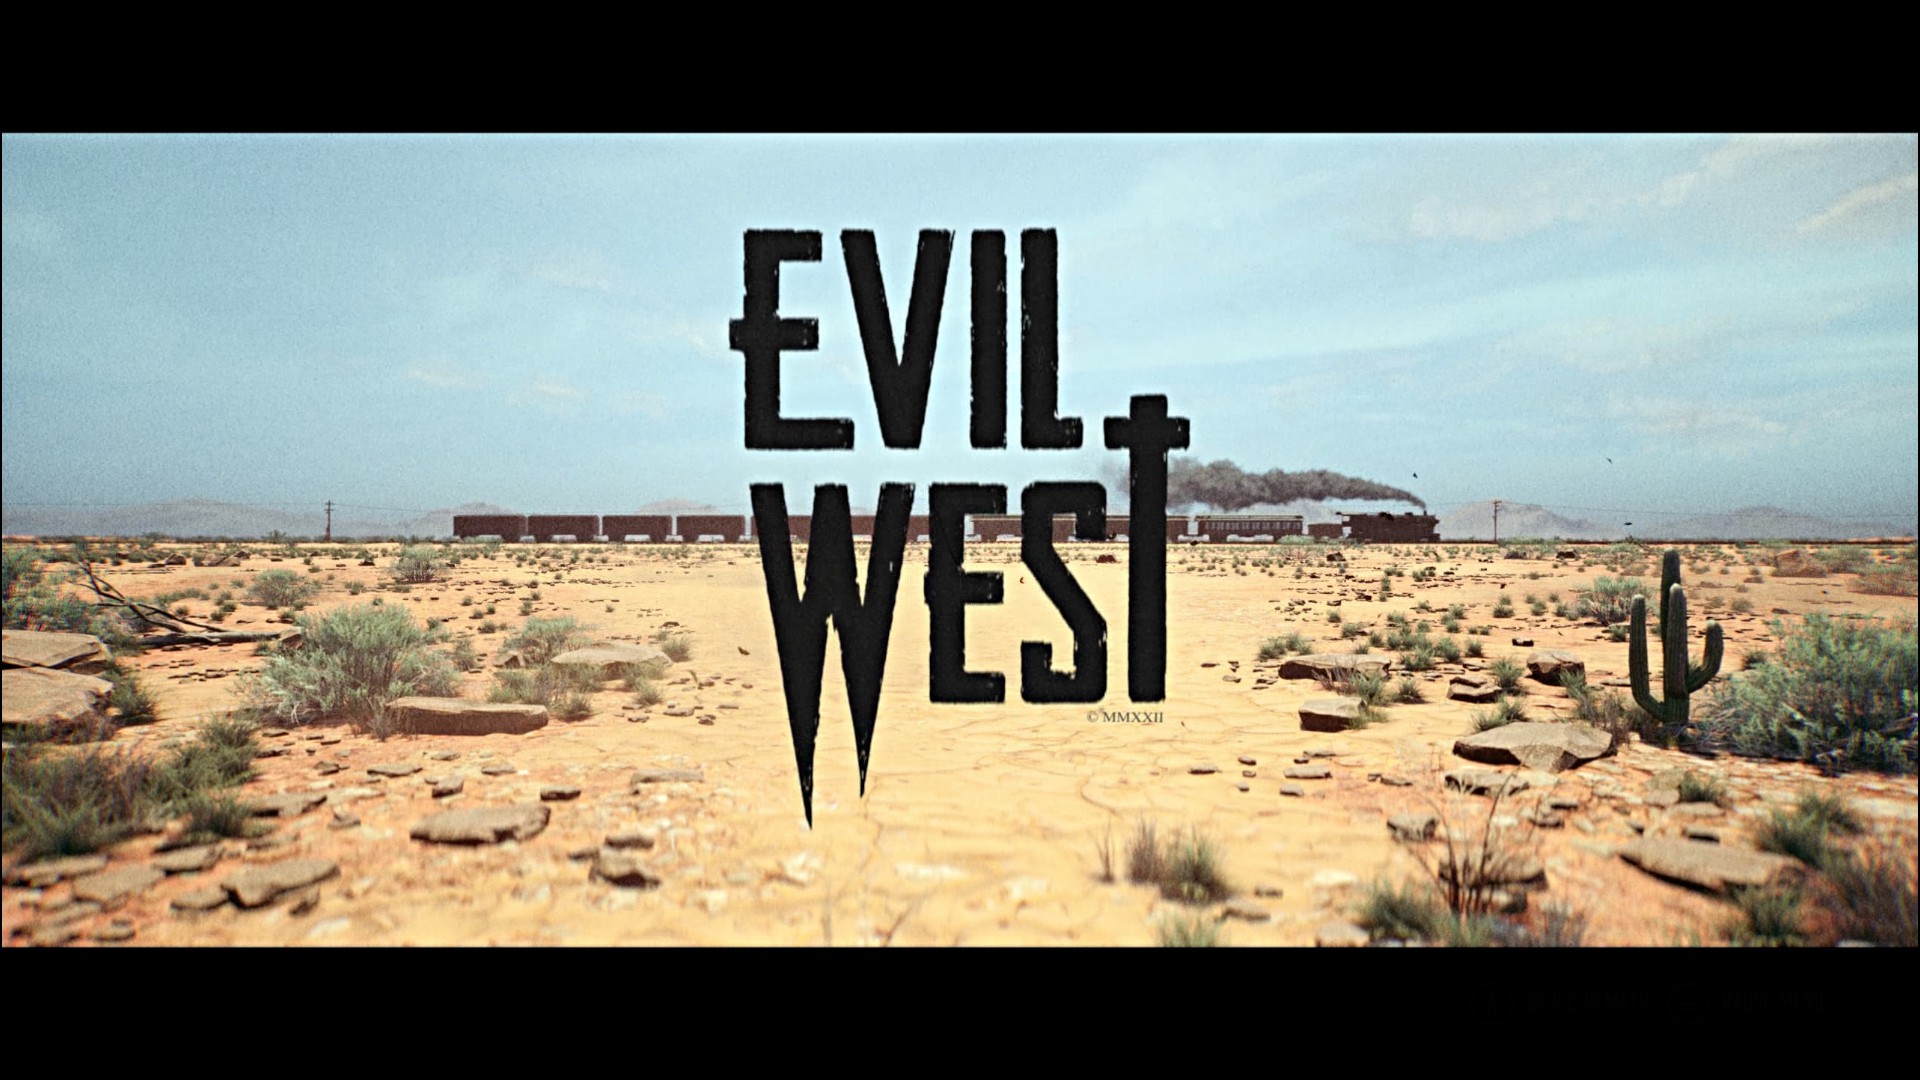 This new Evil West gameplay is ruthless!, gameplay